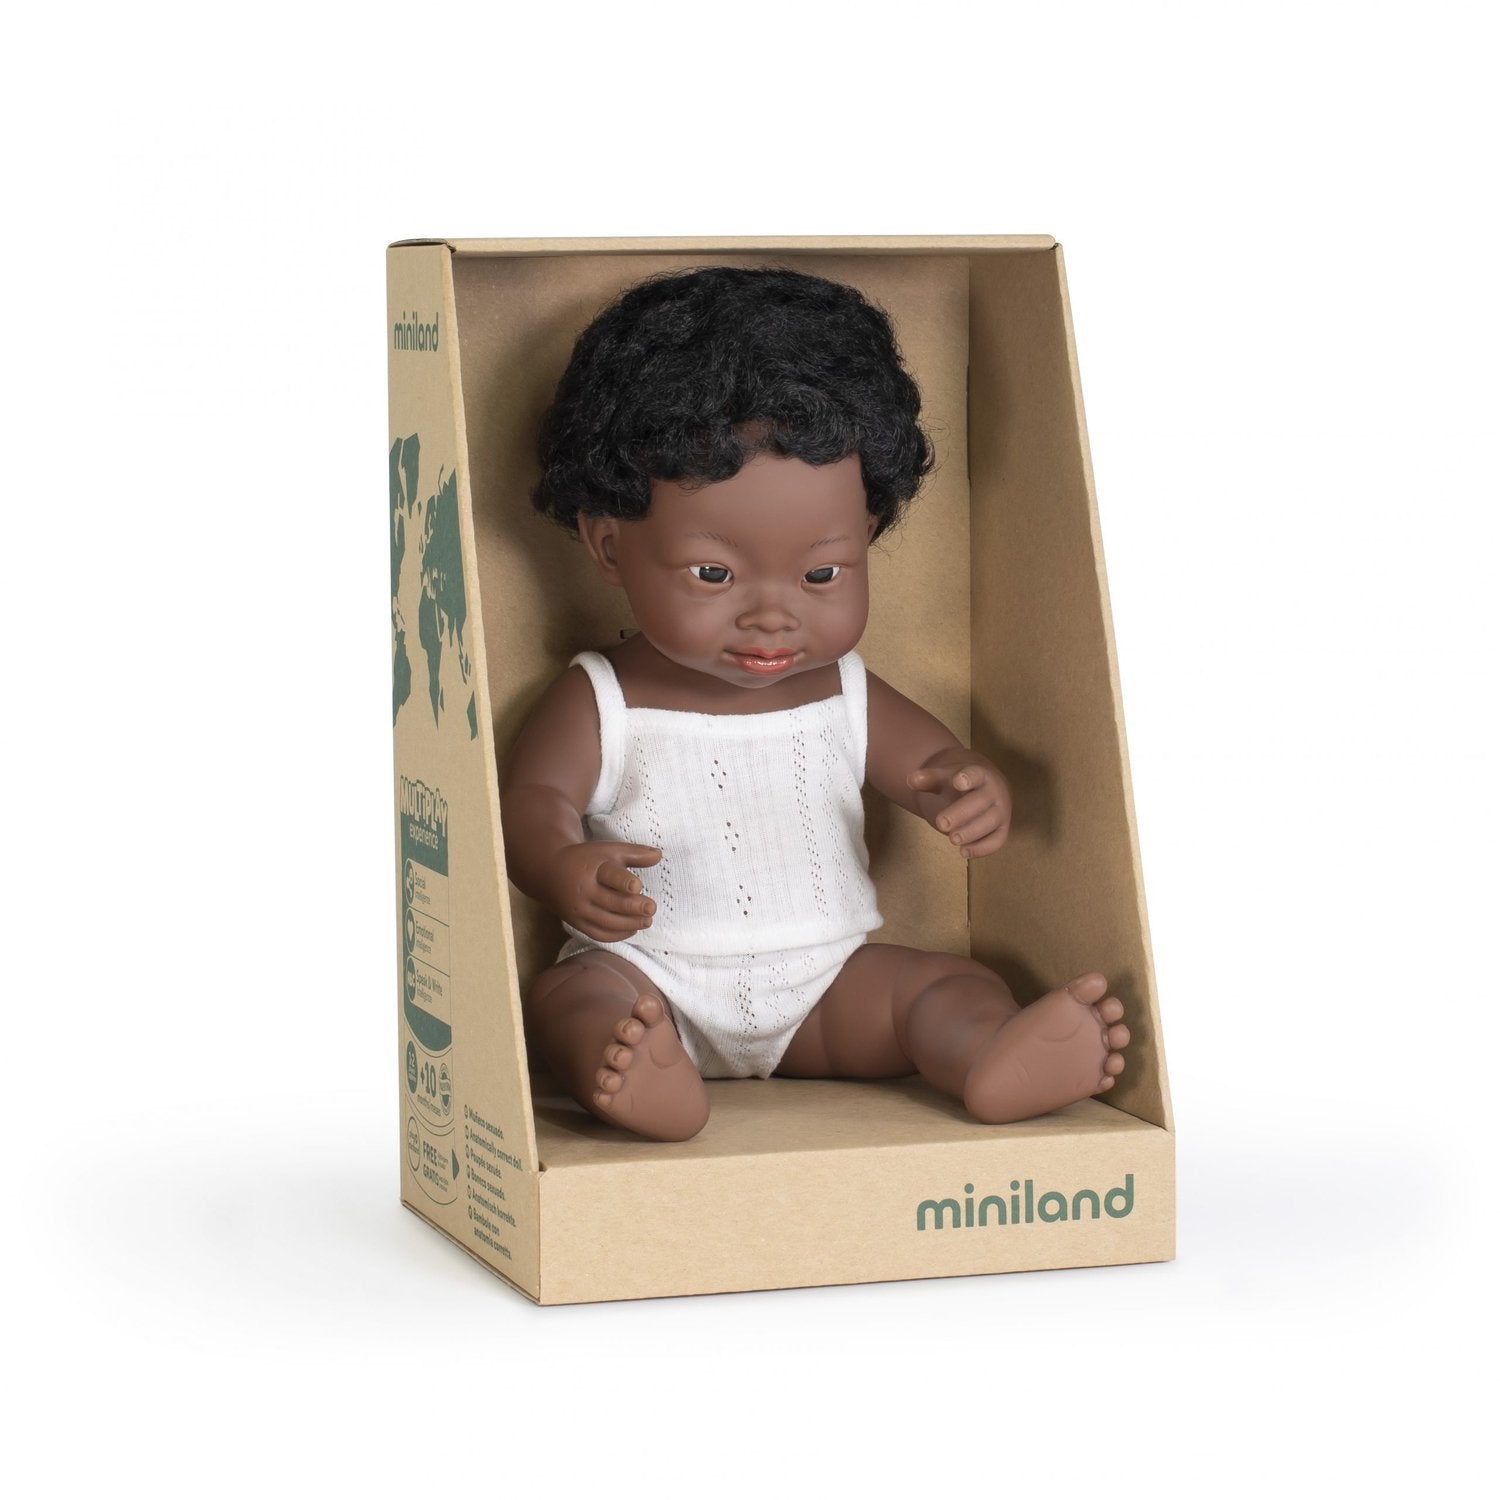 Miniland Toddler Doll with Down Syndrome Boy 38cm